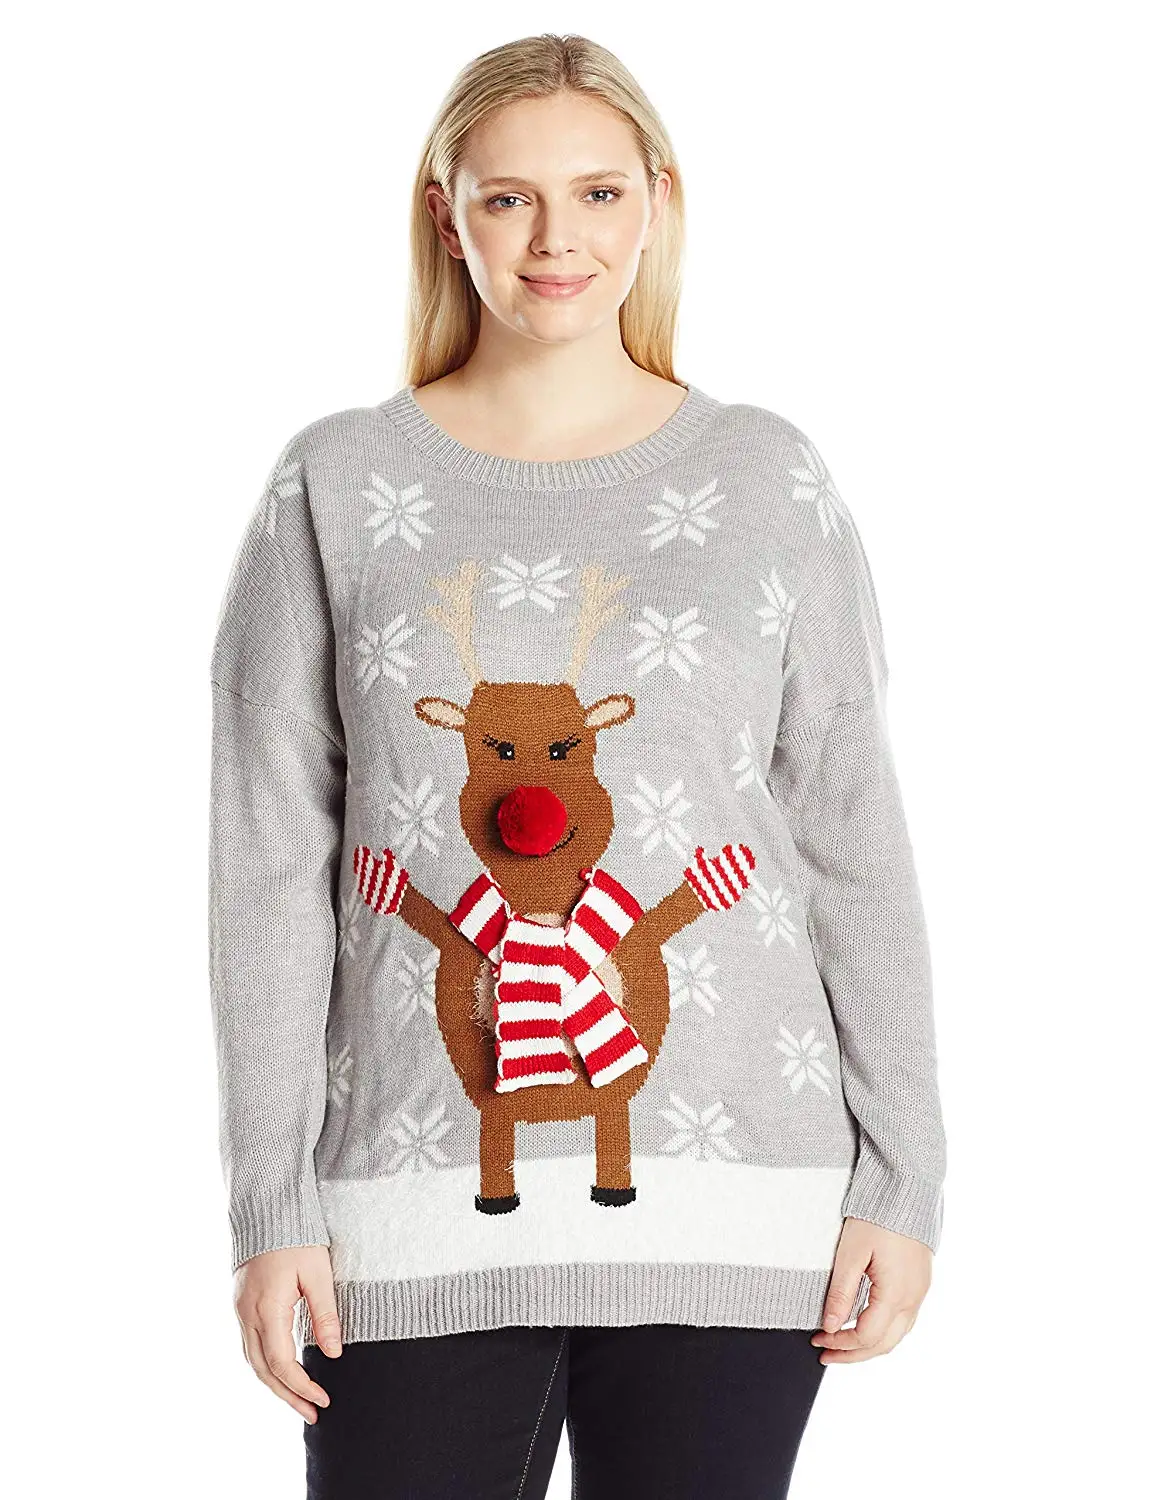 Cheap Plus Size Christmas Sweater, find Plus Size Christmas Sweater ...